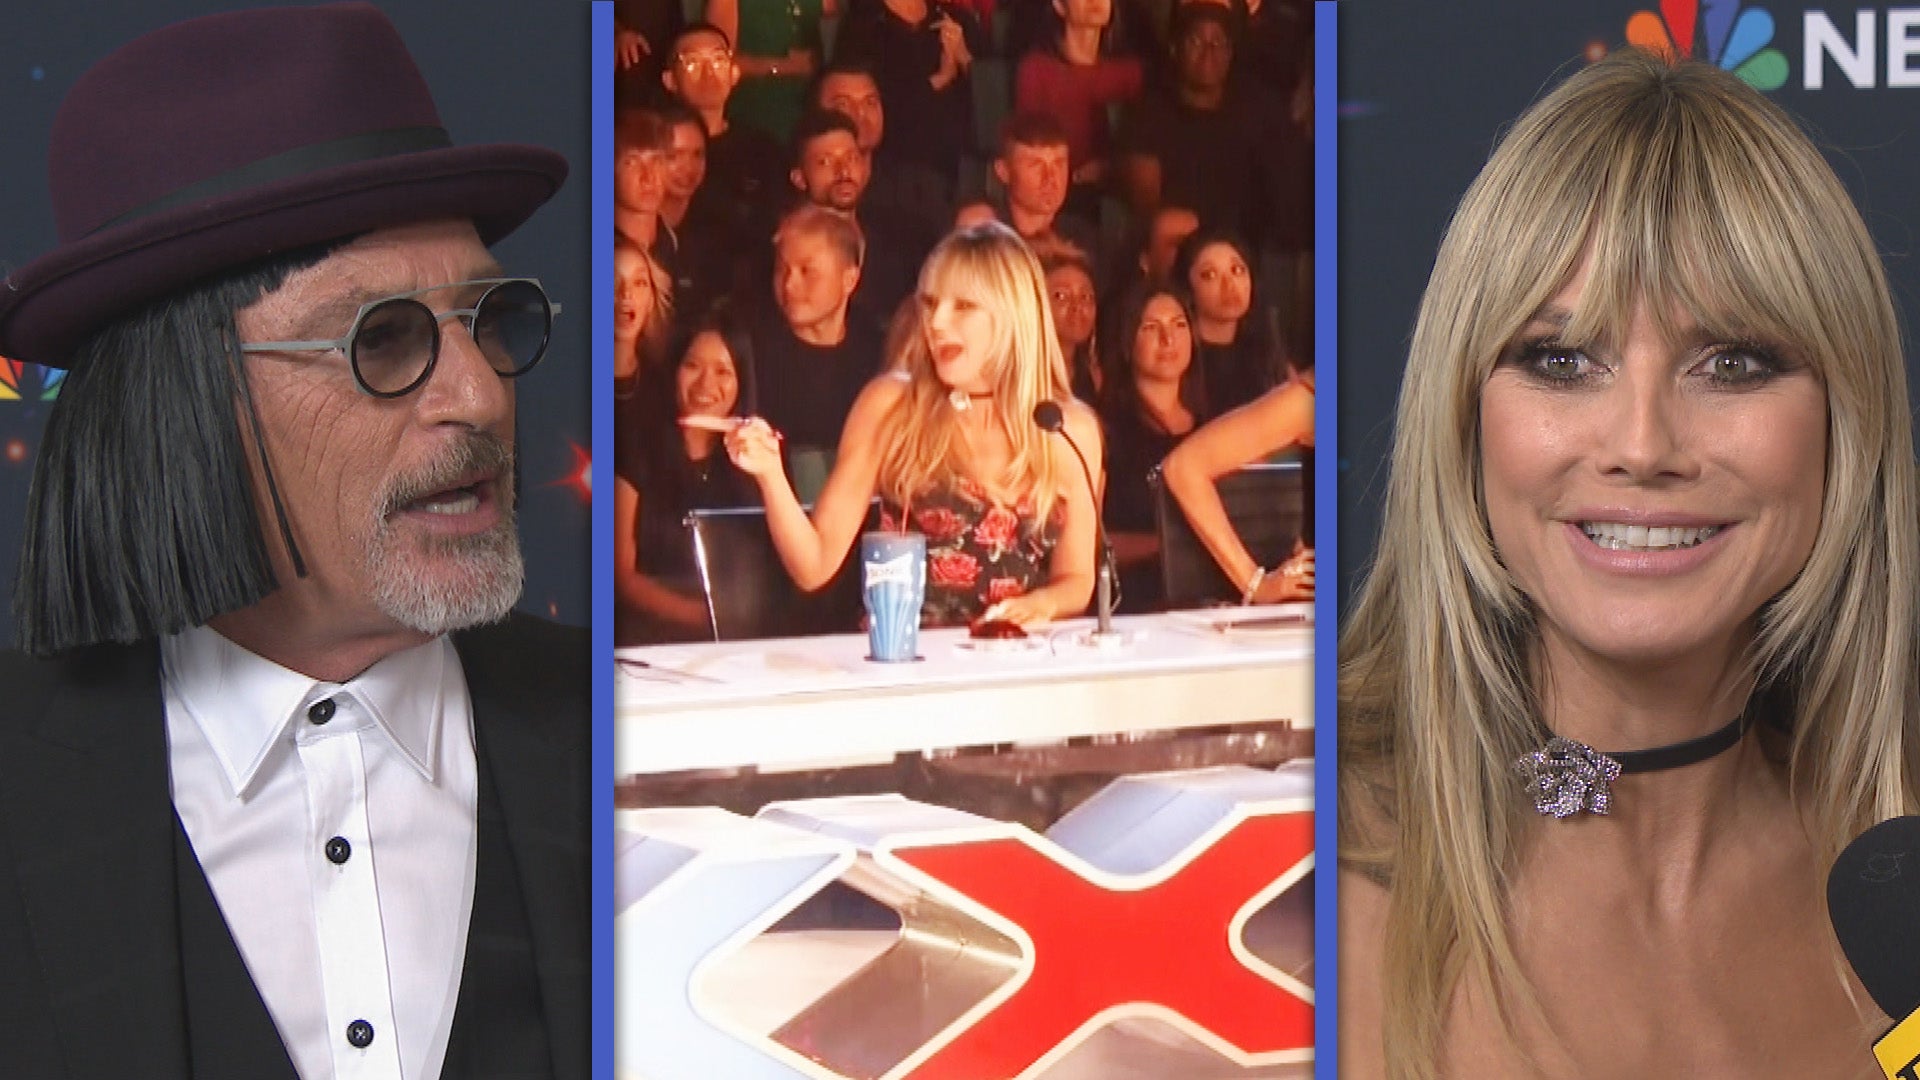 ‘AGT’: Heidi Klum on Howie Mandel Pranking Her During Contestant Performance (Exclusive)